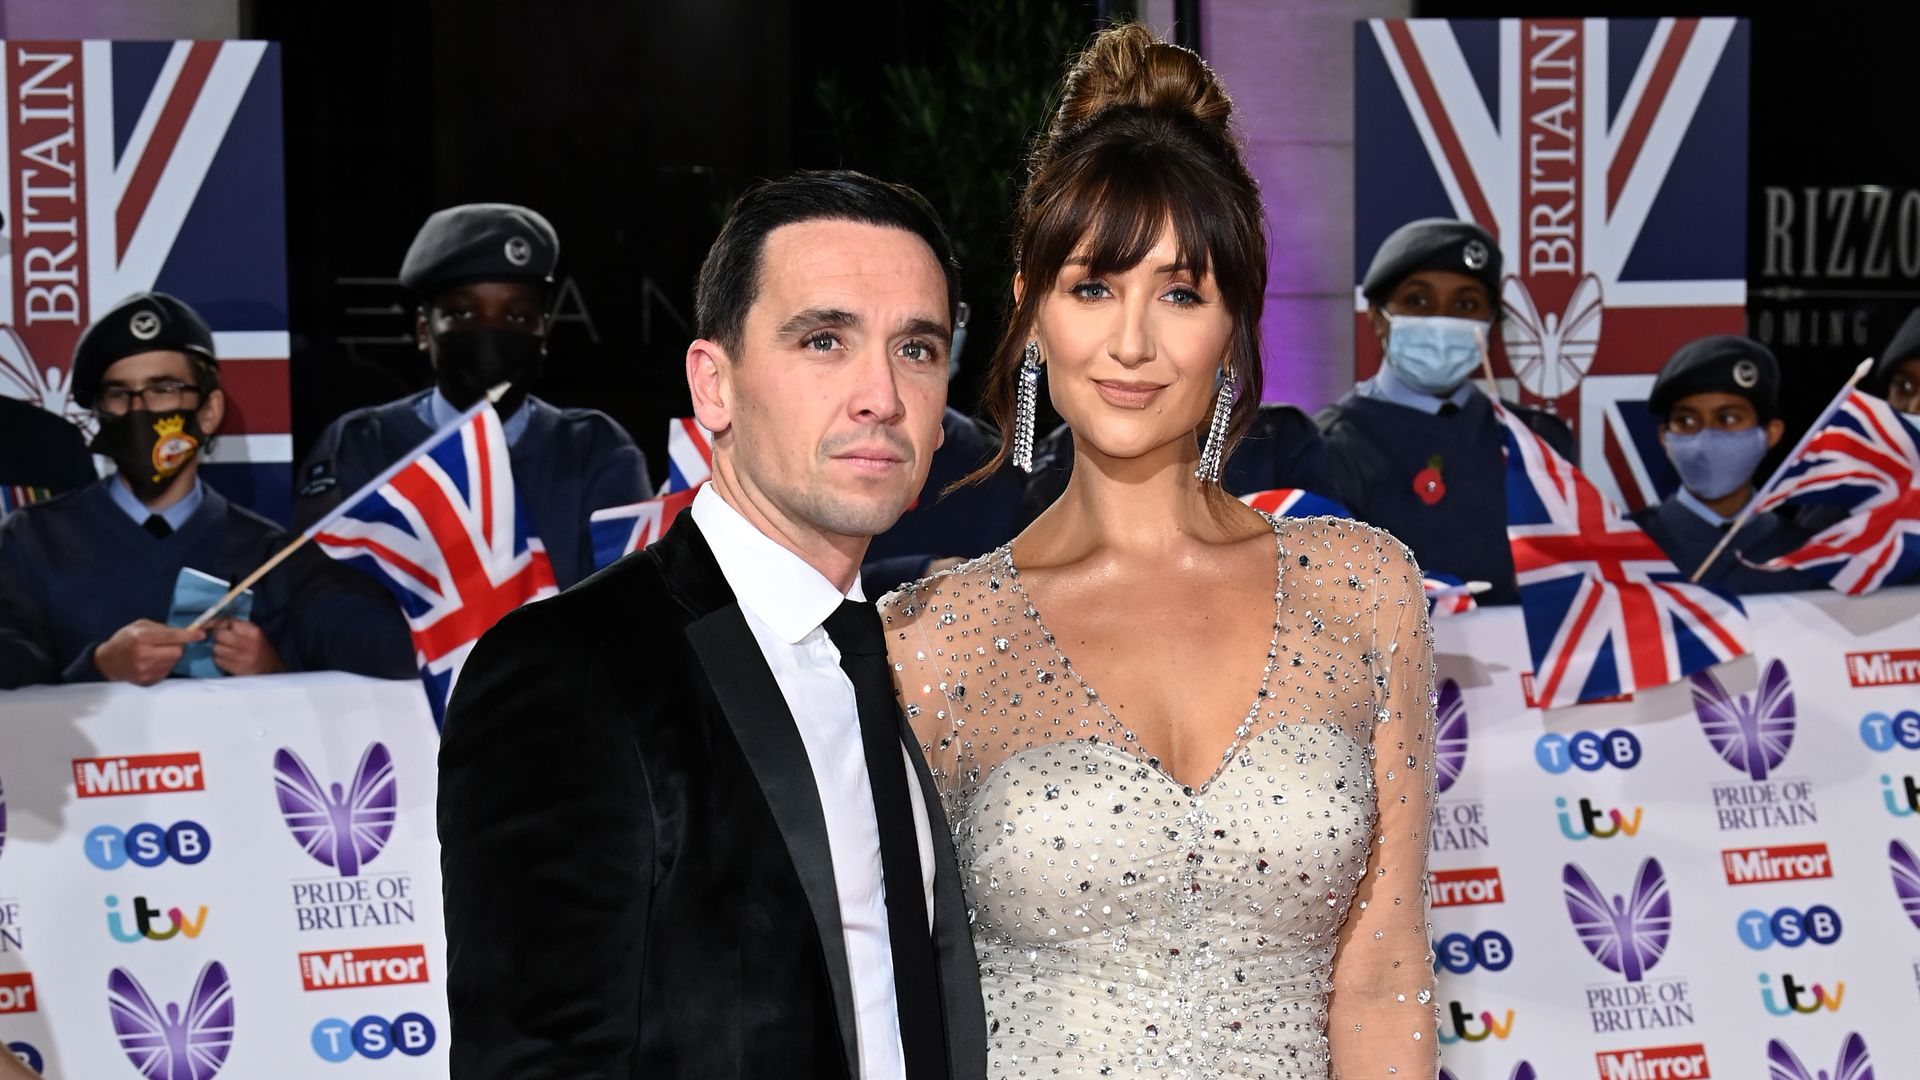 Catherine Tyldesley and her husband Tom Pitfield at the Pride of Britain Awards 2021